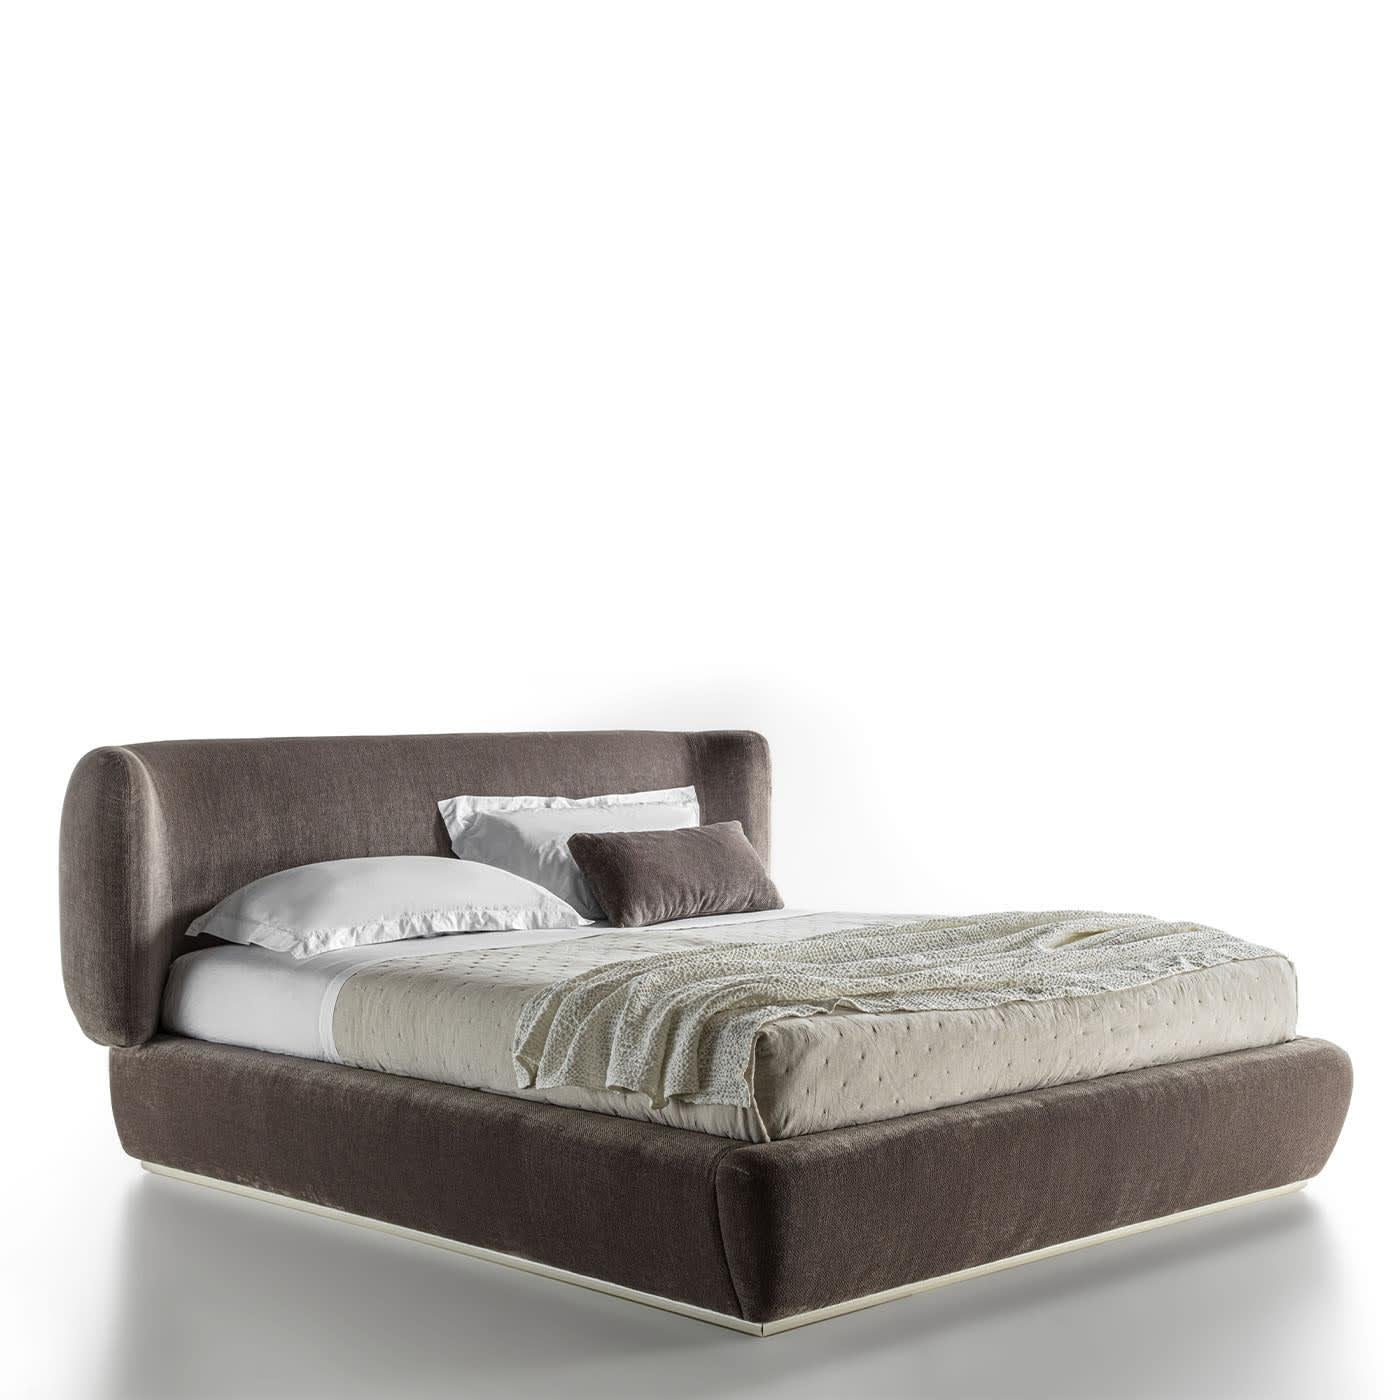 Upholstered bed characterized by the softness of the volumes. Bed base and mattress are not included. Upholstery available in different fabrics upon request.